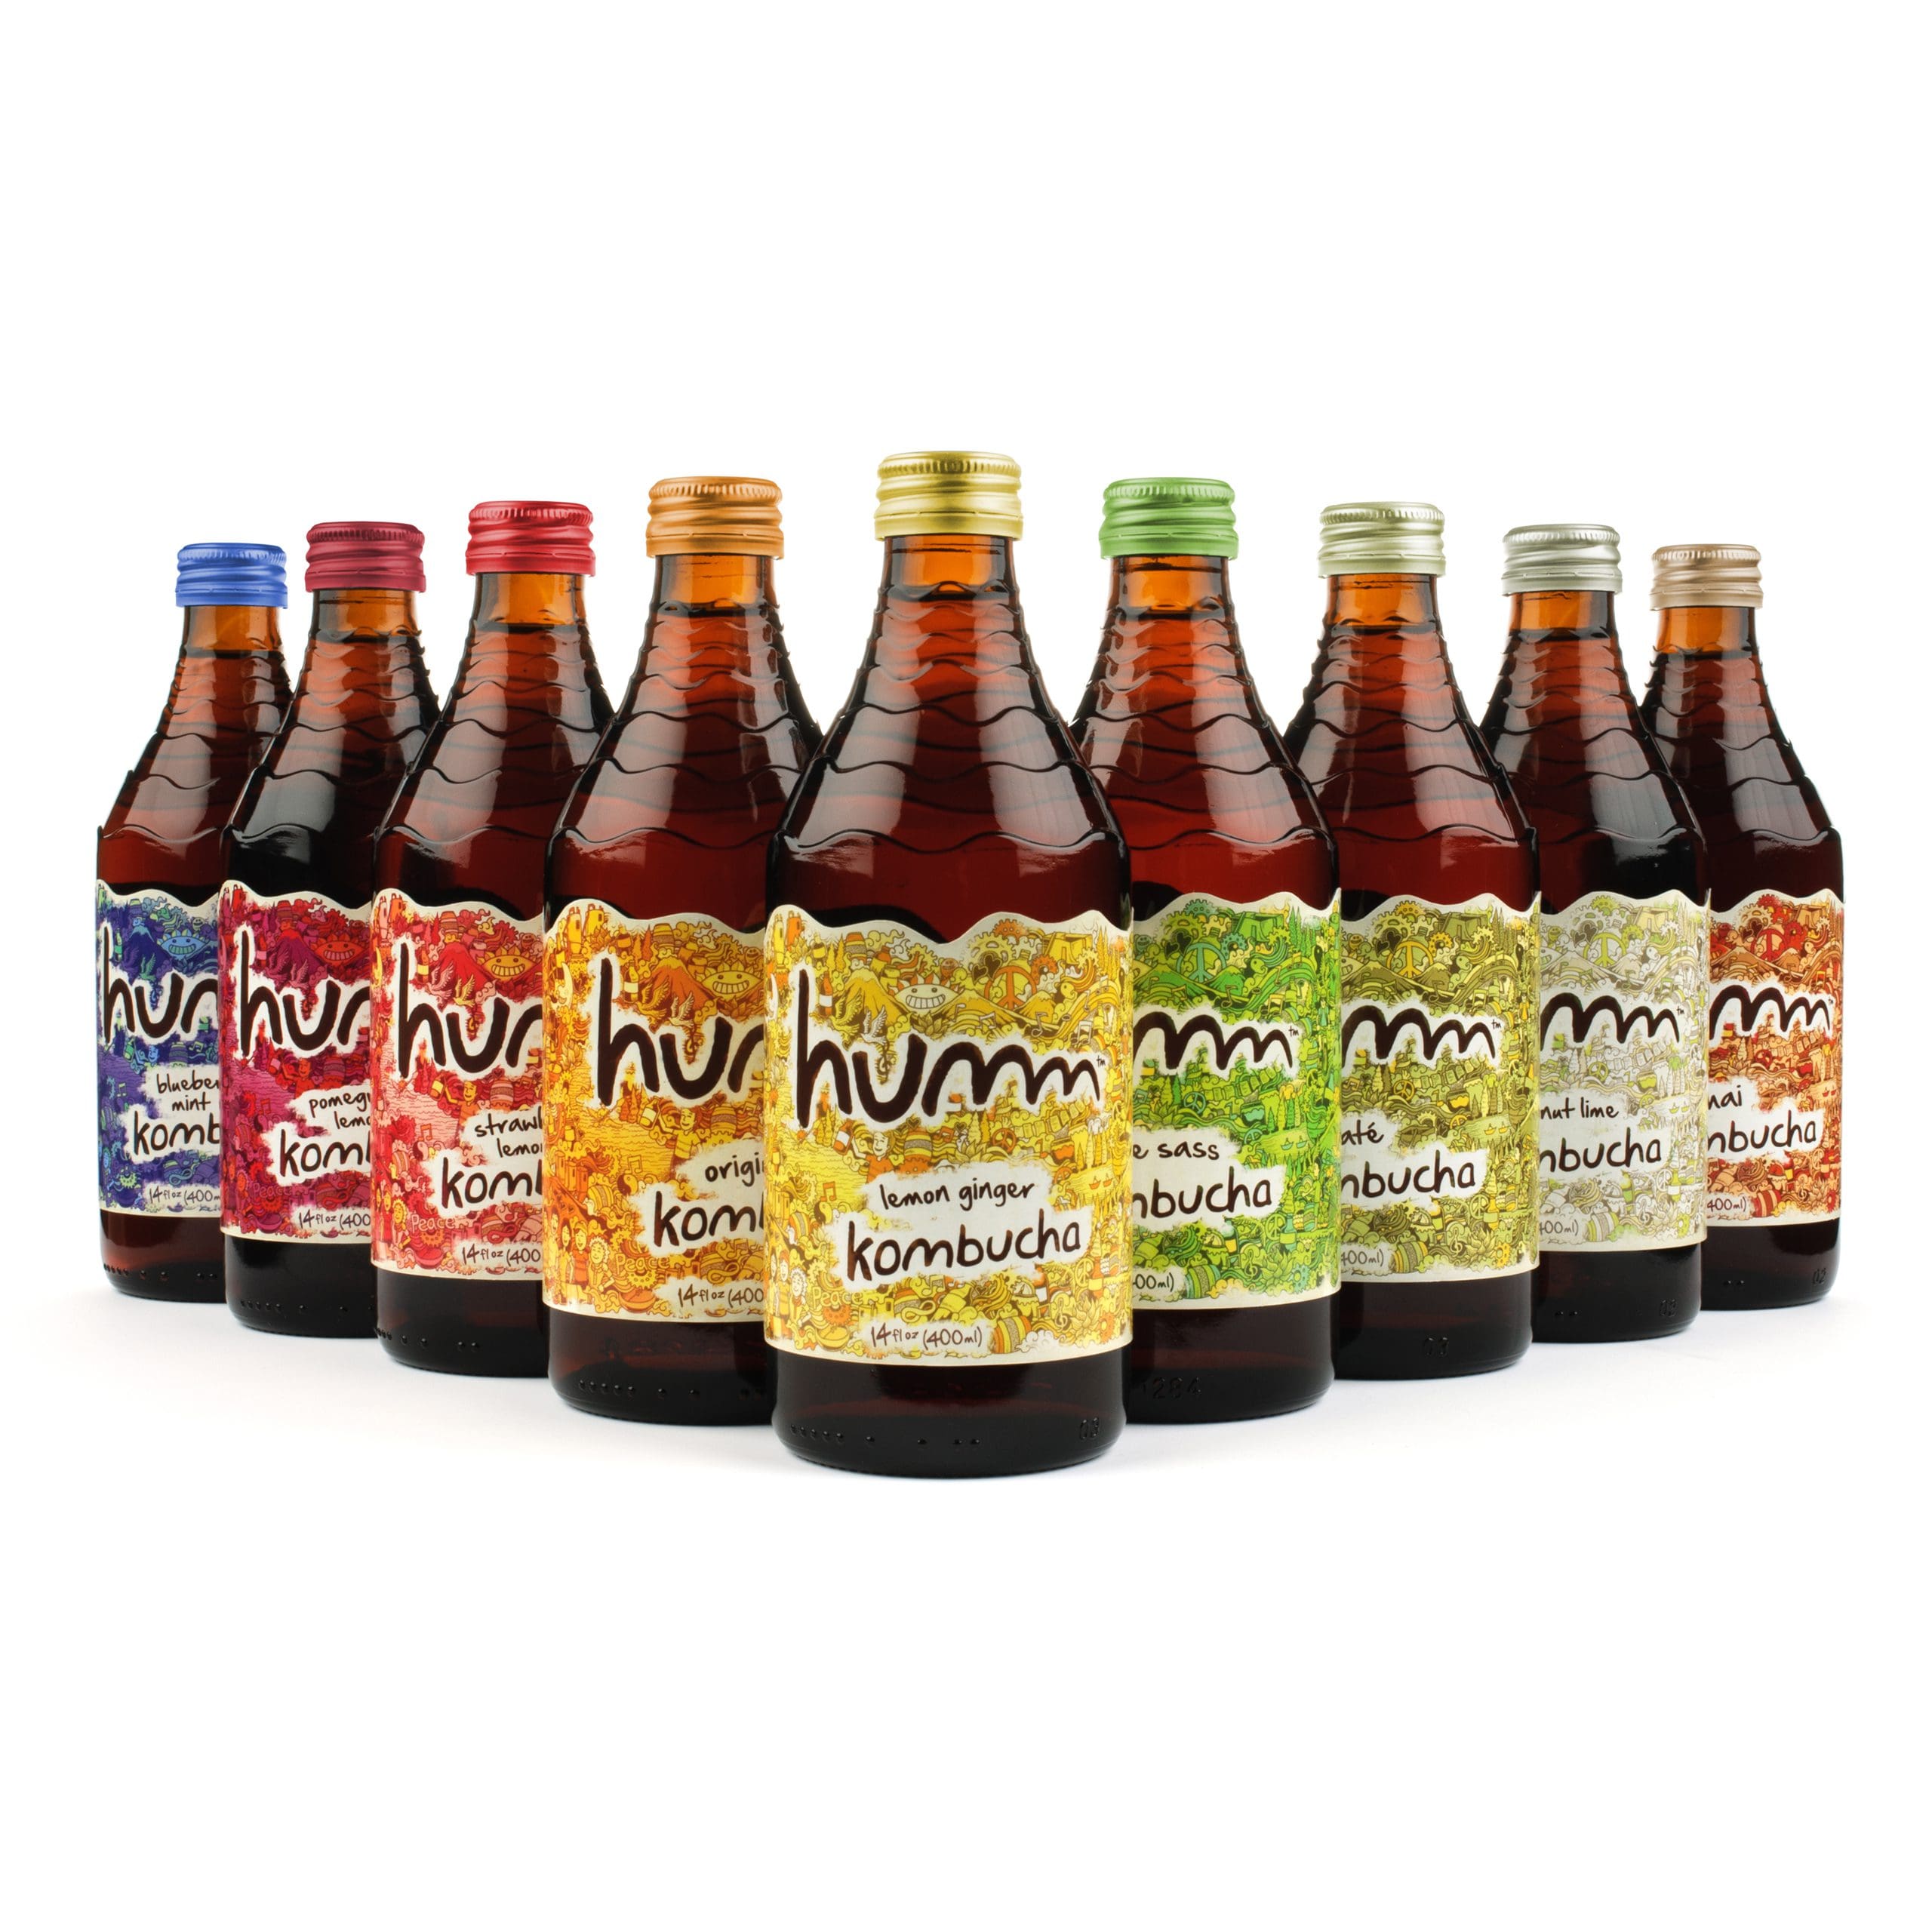 A group photo showing nine Humm Kombucha bottles in a row on a white background.